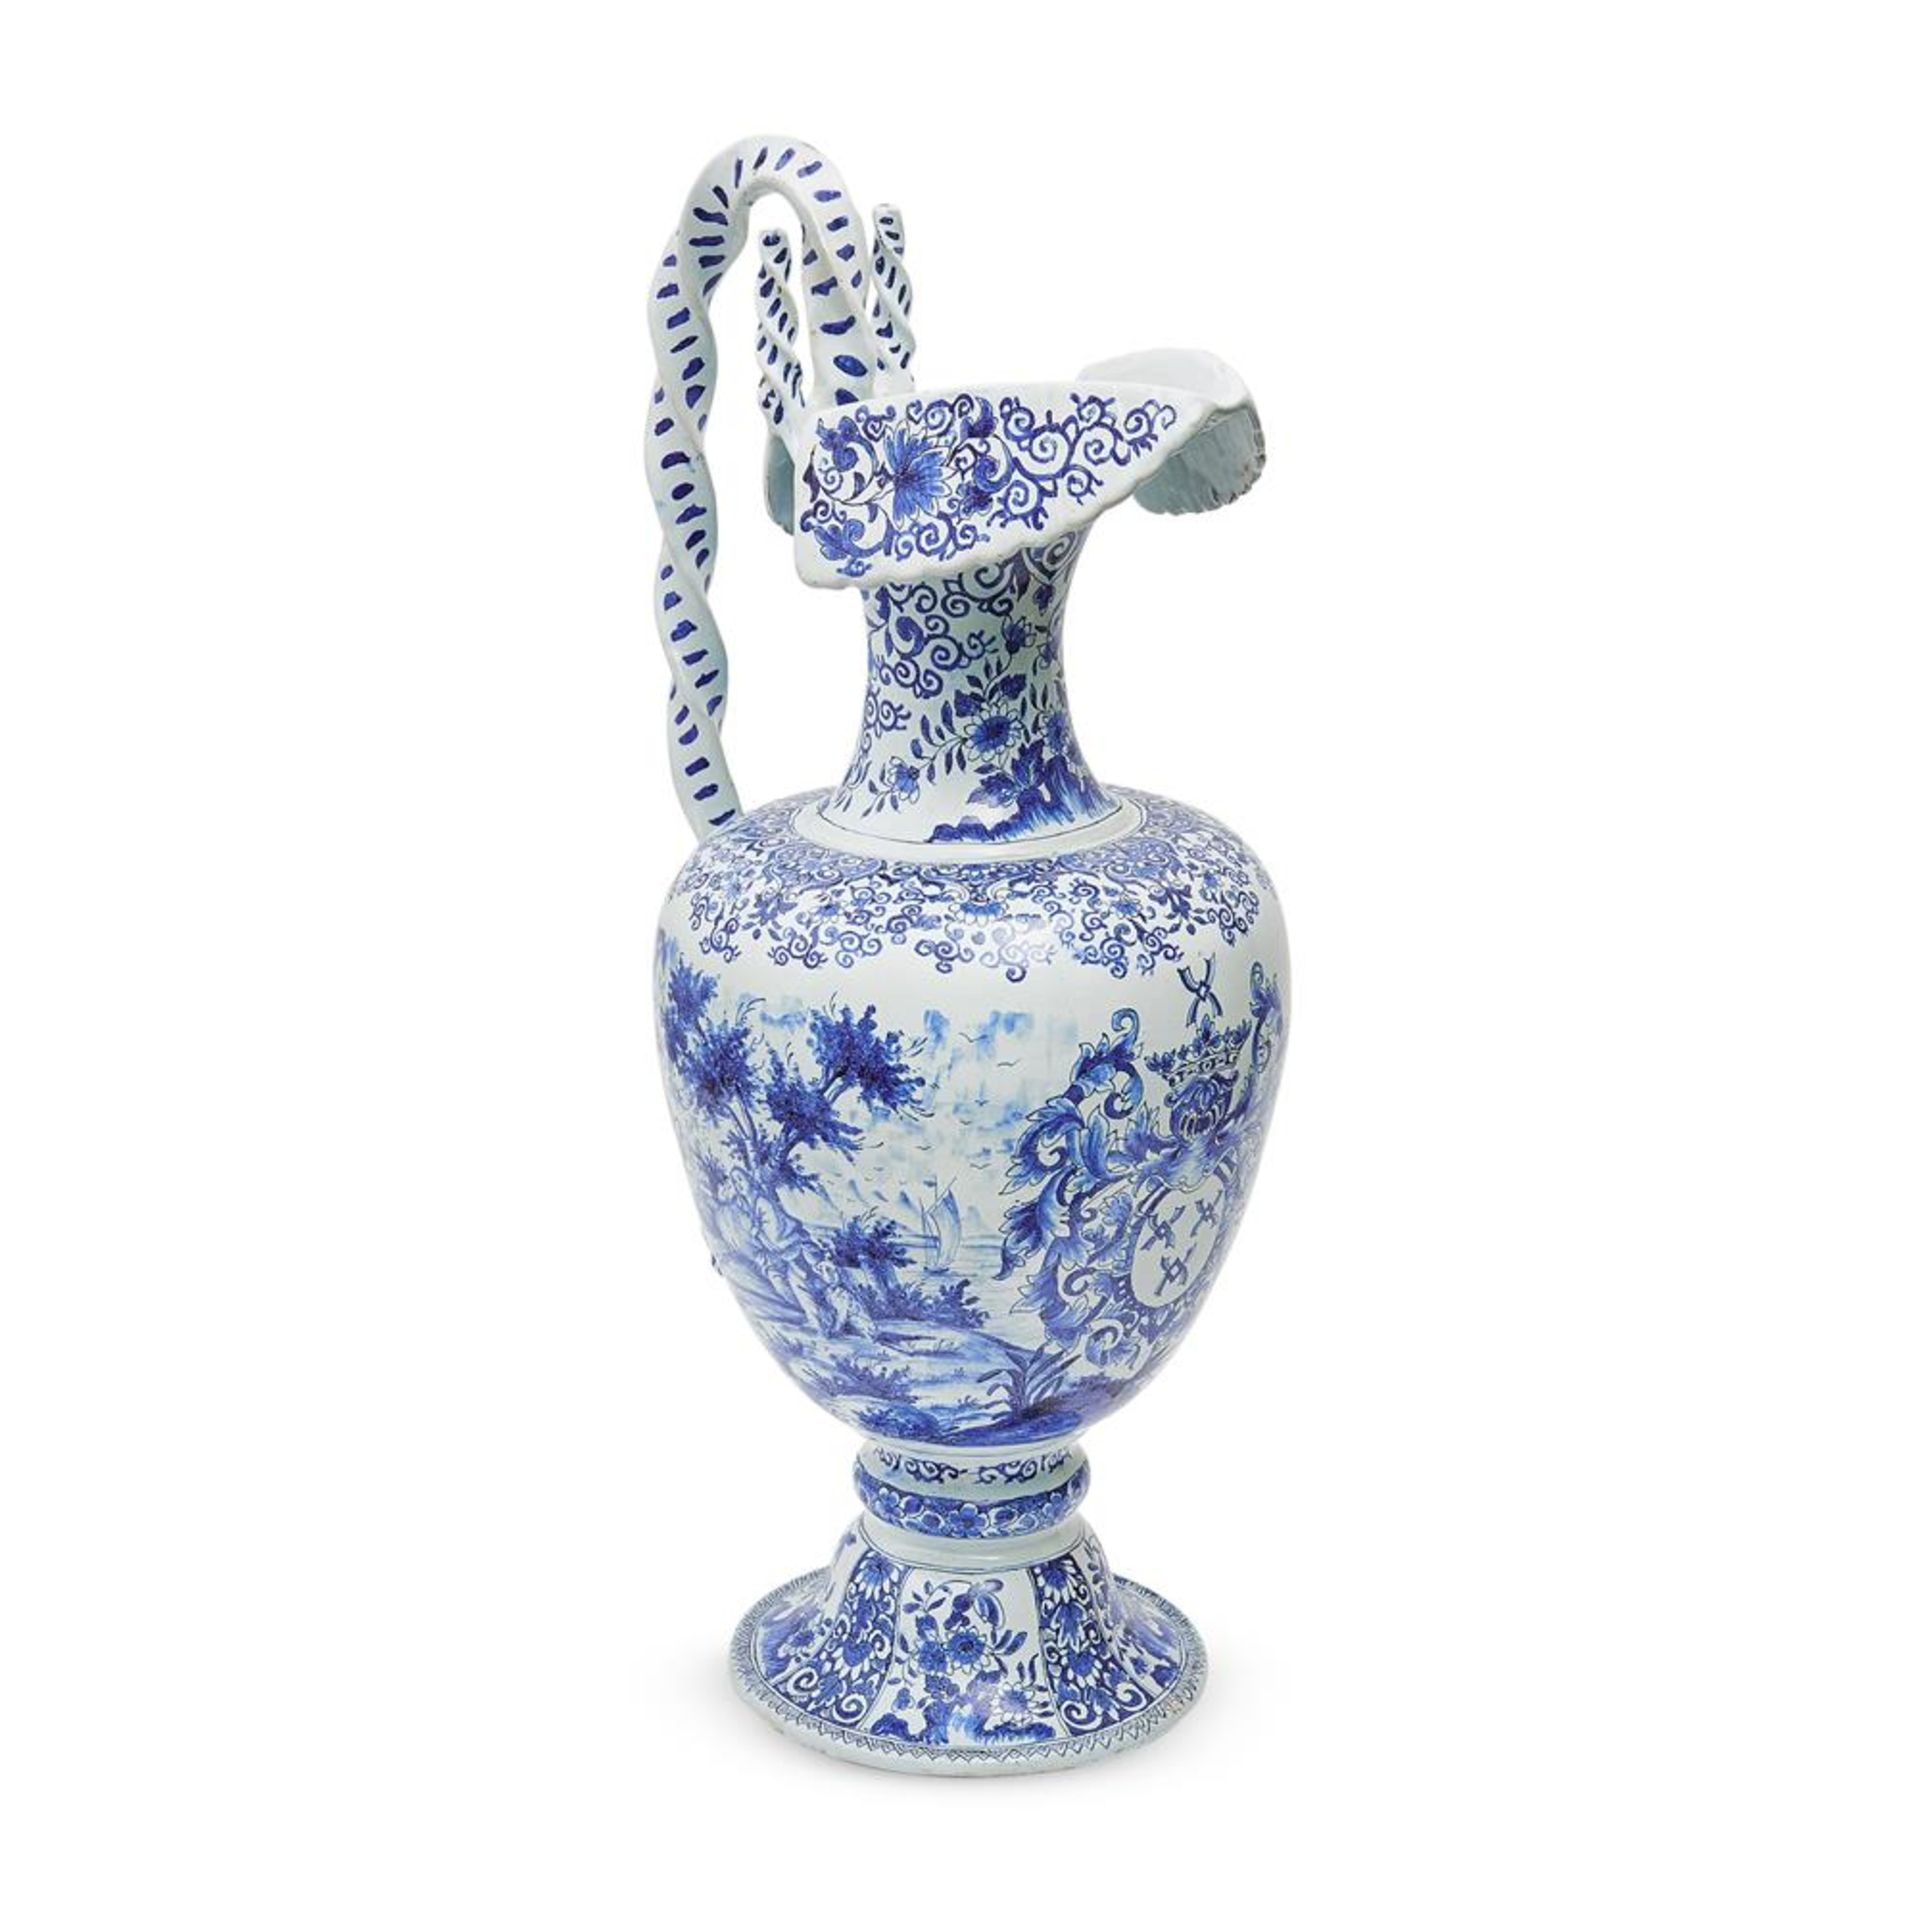 A DUTCH DELFT BLUE AND WHITE BALUSTER JUG, LATE 19TH CENTURY